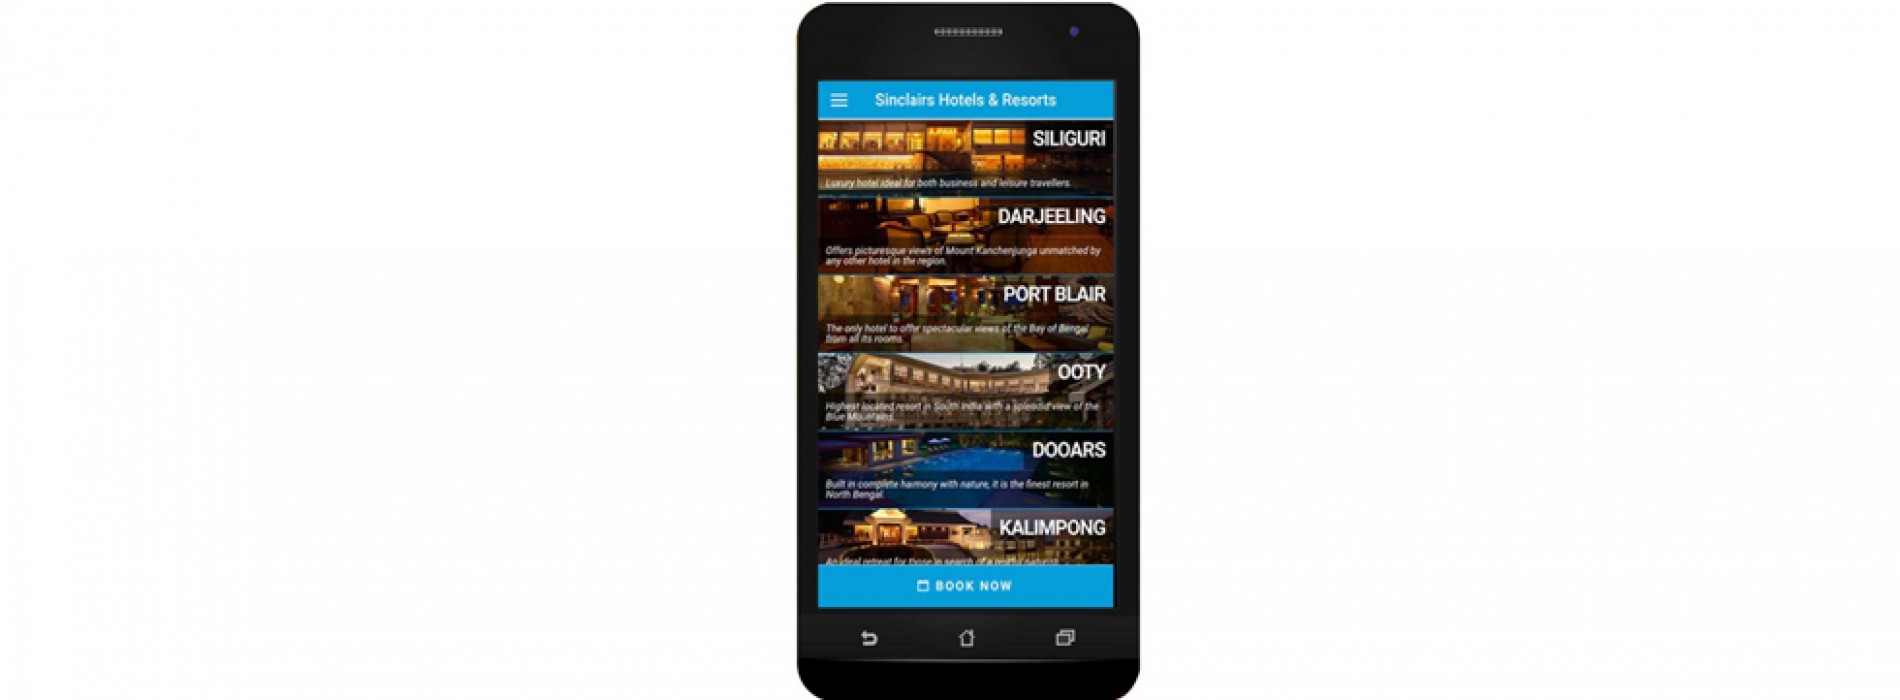 Sinclairs Hotels launches Mobile App